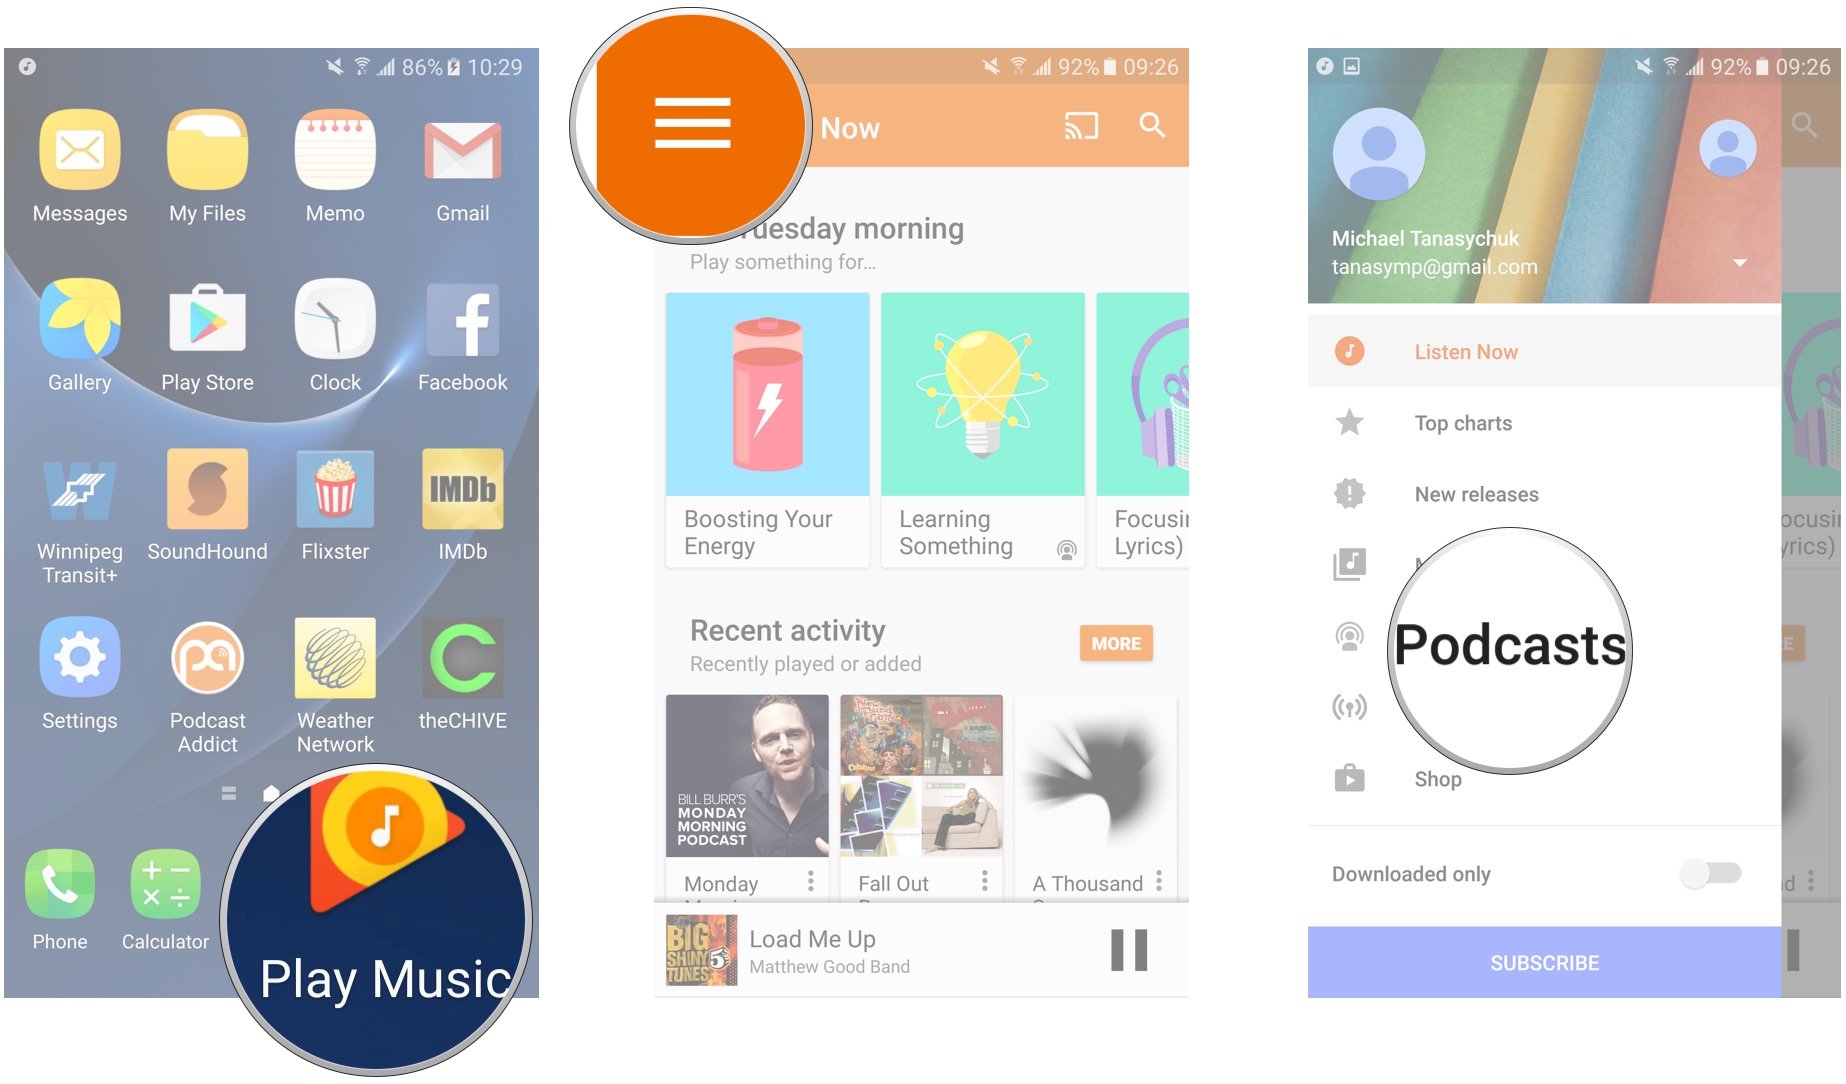 Launch Google Play Music, tap the menu button, tap Podcasts